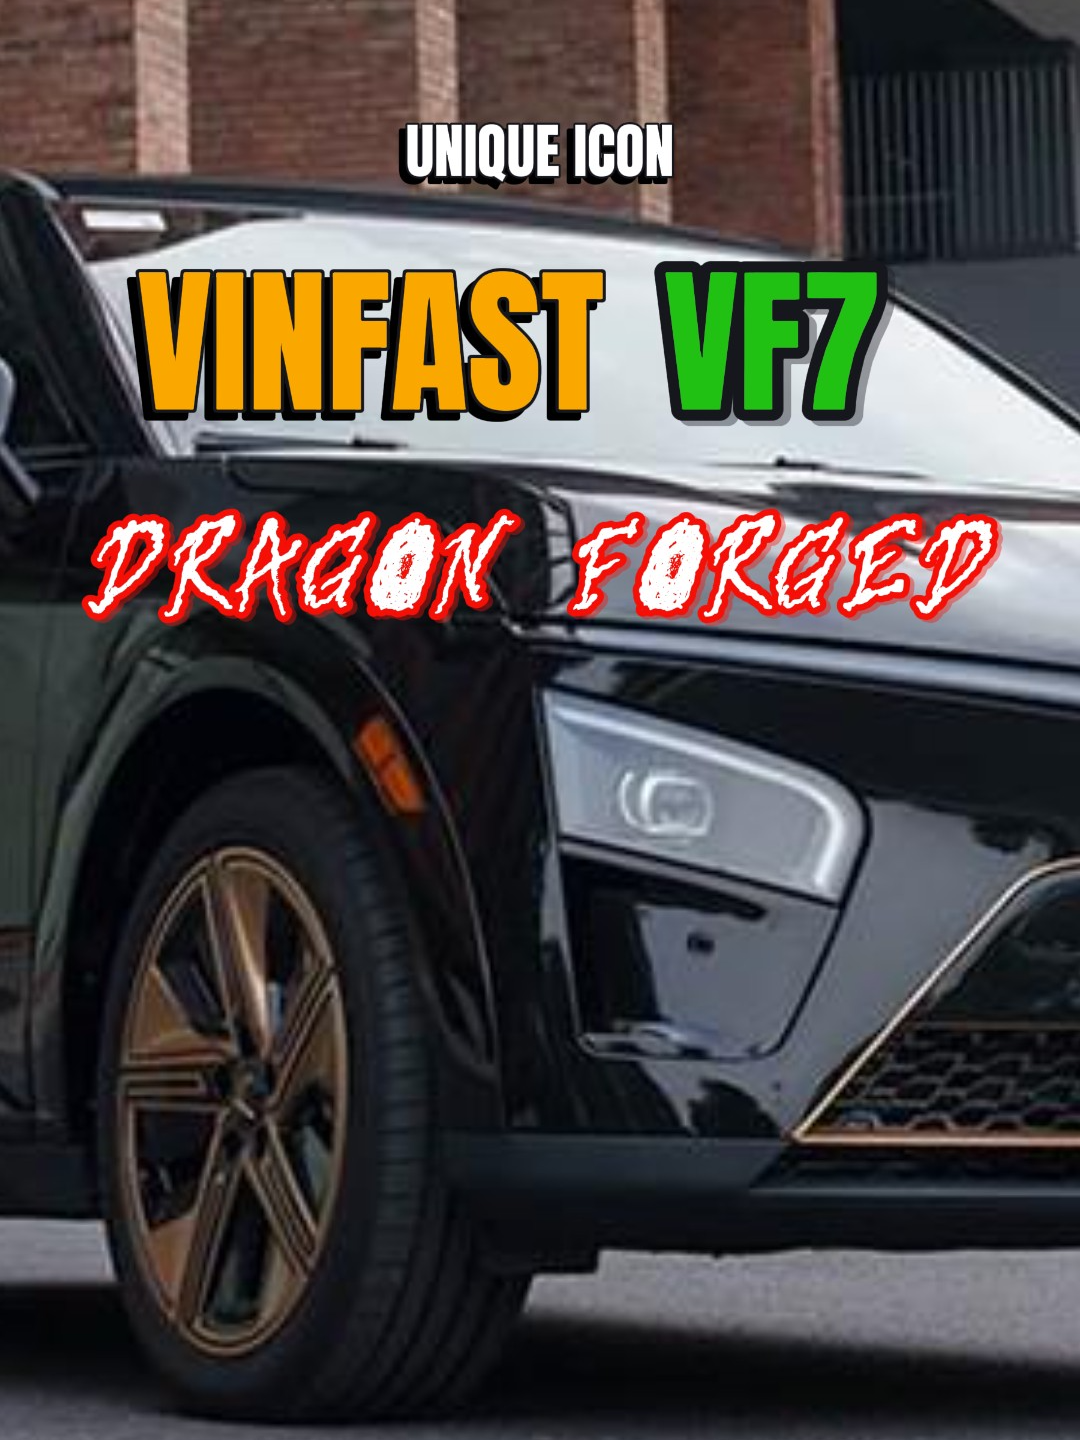 VinFast VF 7 Dragonforged: Breaking Sales Records and Redefining the C-Segment SUV #vinfast #vcreator #vf7